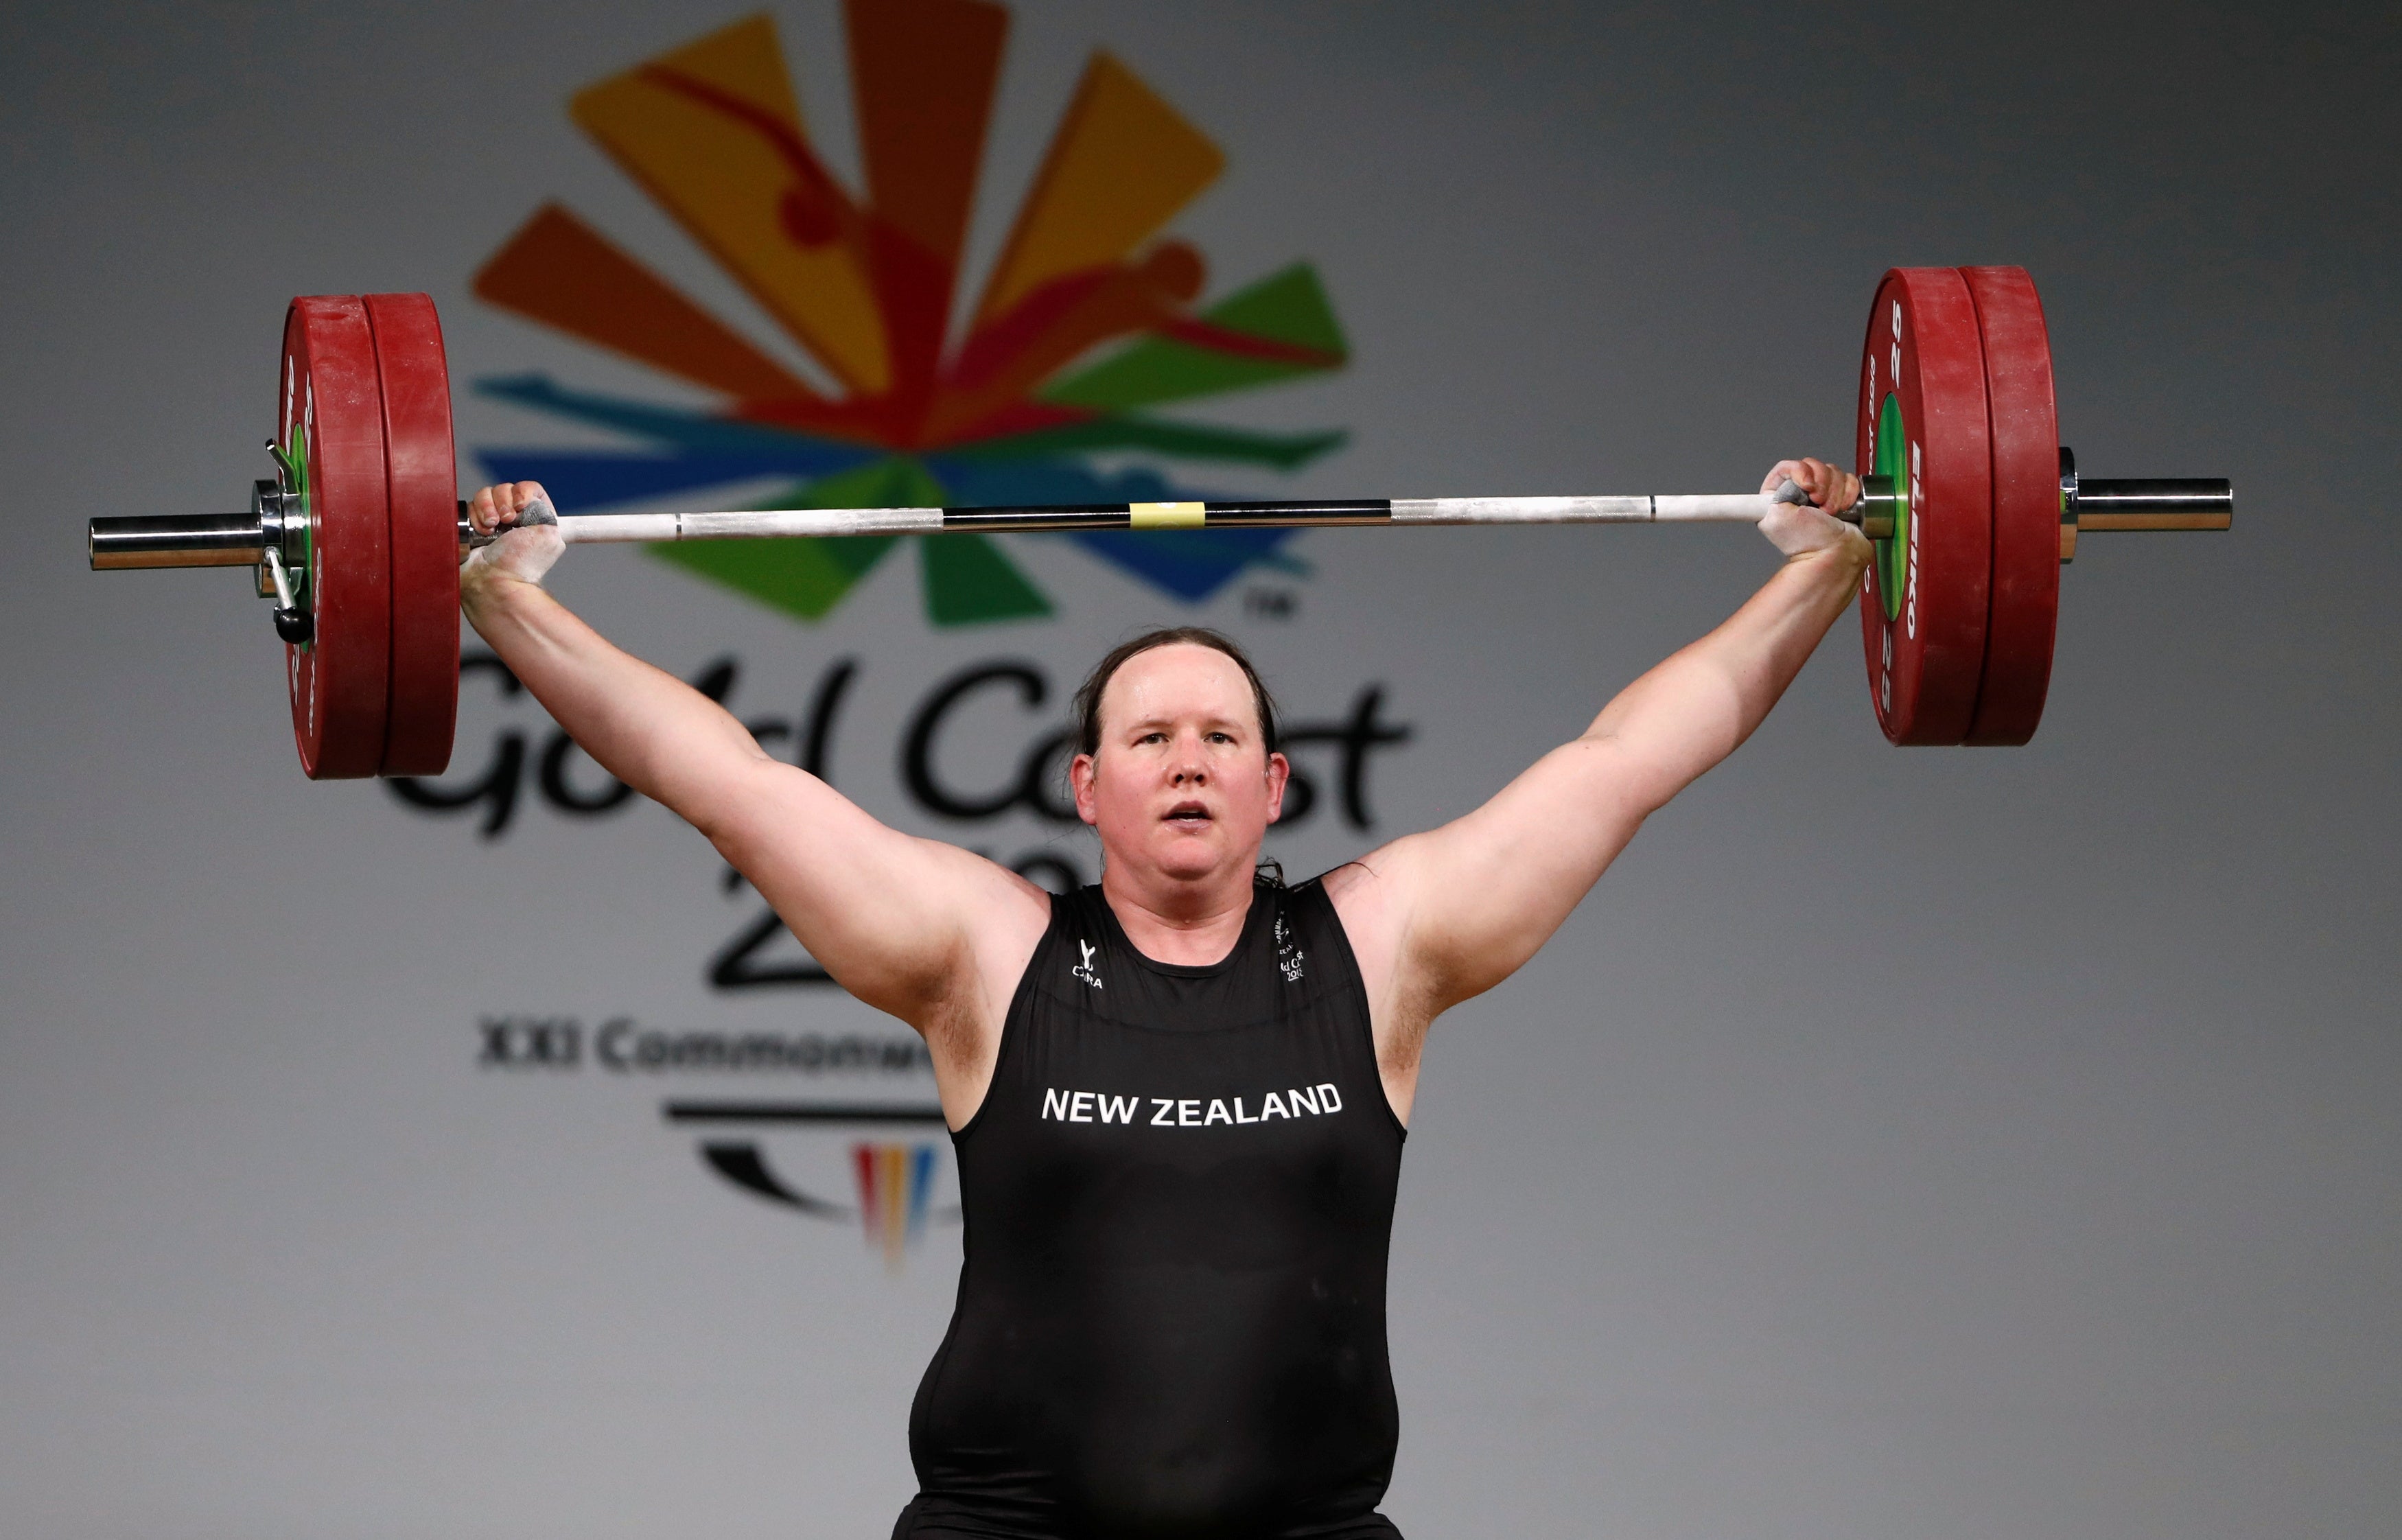 Hubbard will be the oldest weightlifter at the games, and will be ranked fourth in the competition for women weighing 87 kilograms (192 pounds) and over